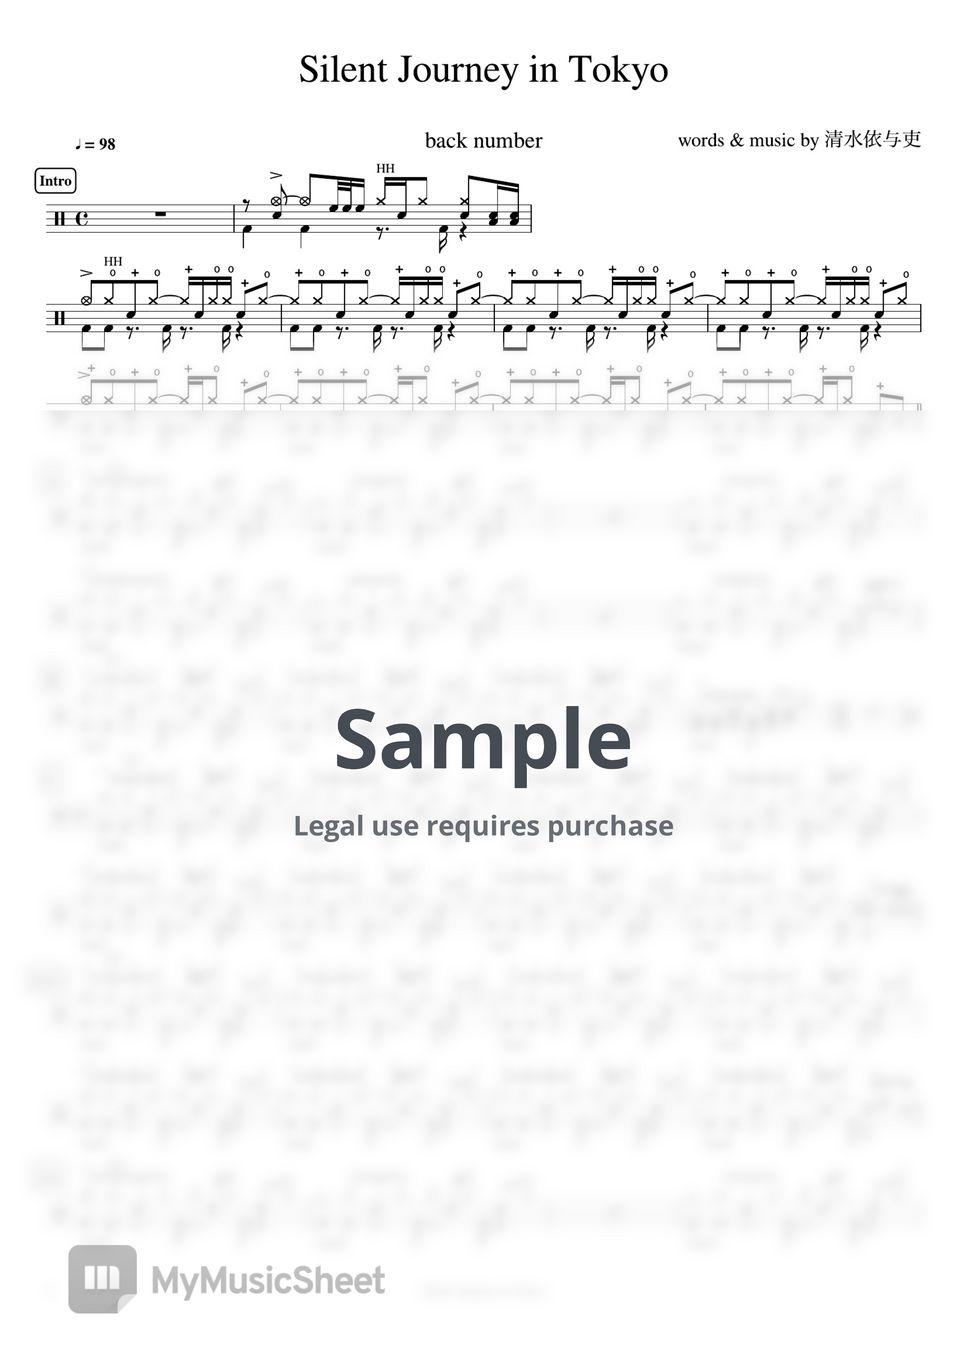 back number - Silent Journey in Tokyo by Cookai's J-pop Drum sheet music!!!